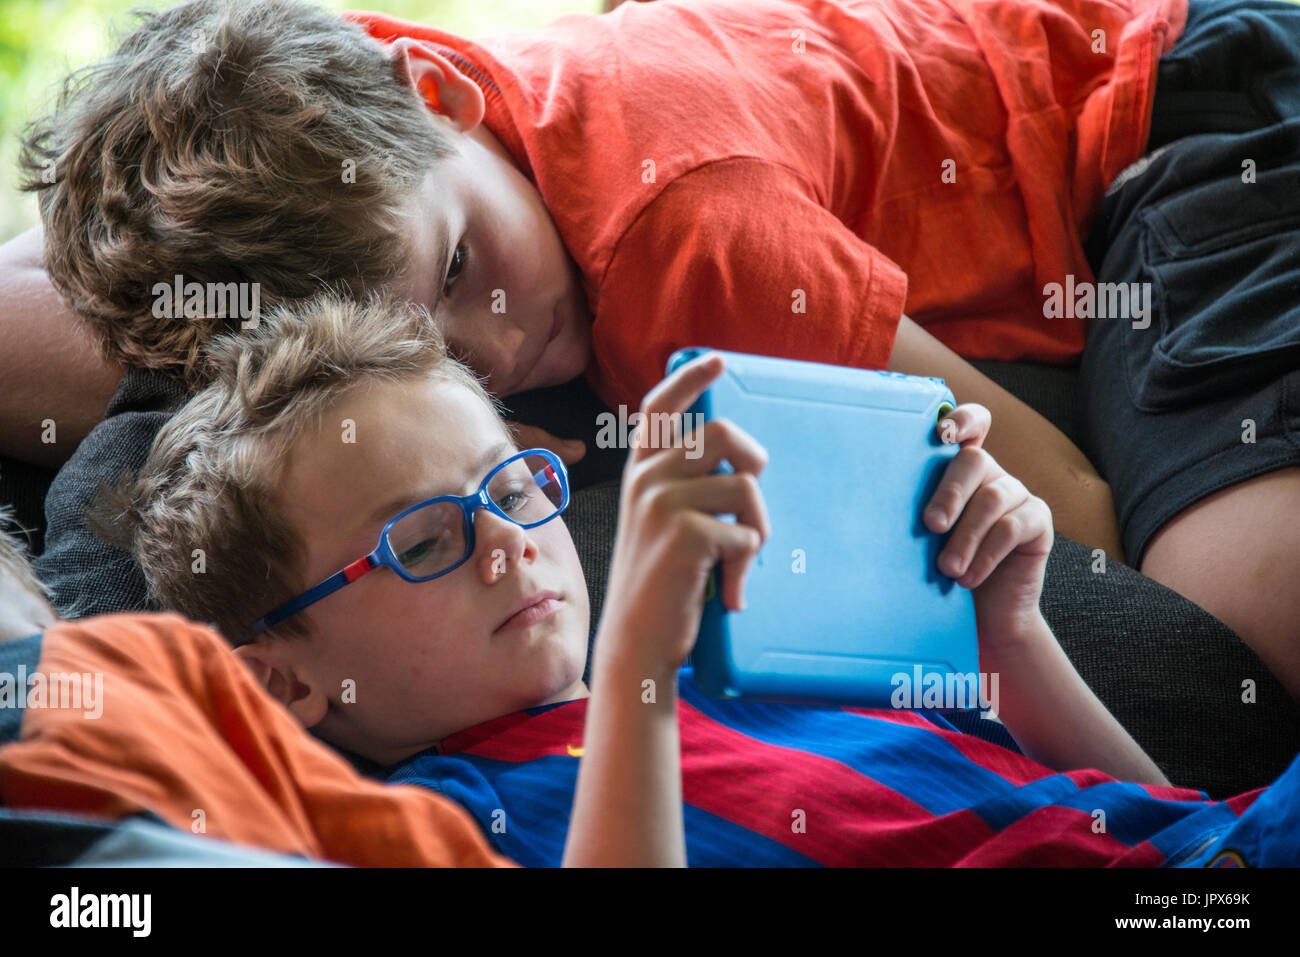 Young Boy playing computer games on iPad with other boy watching, close-up Stock Photo